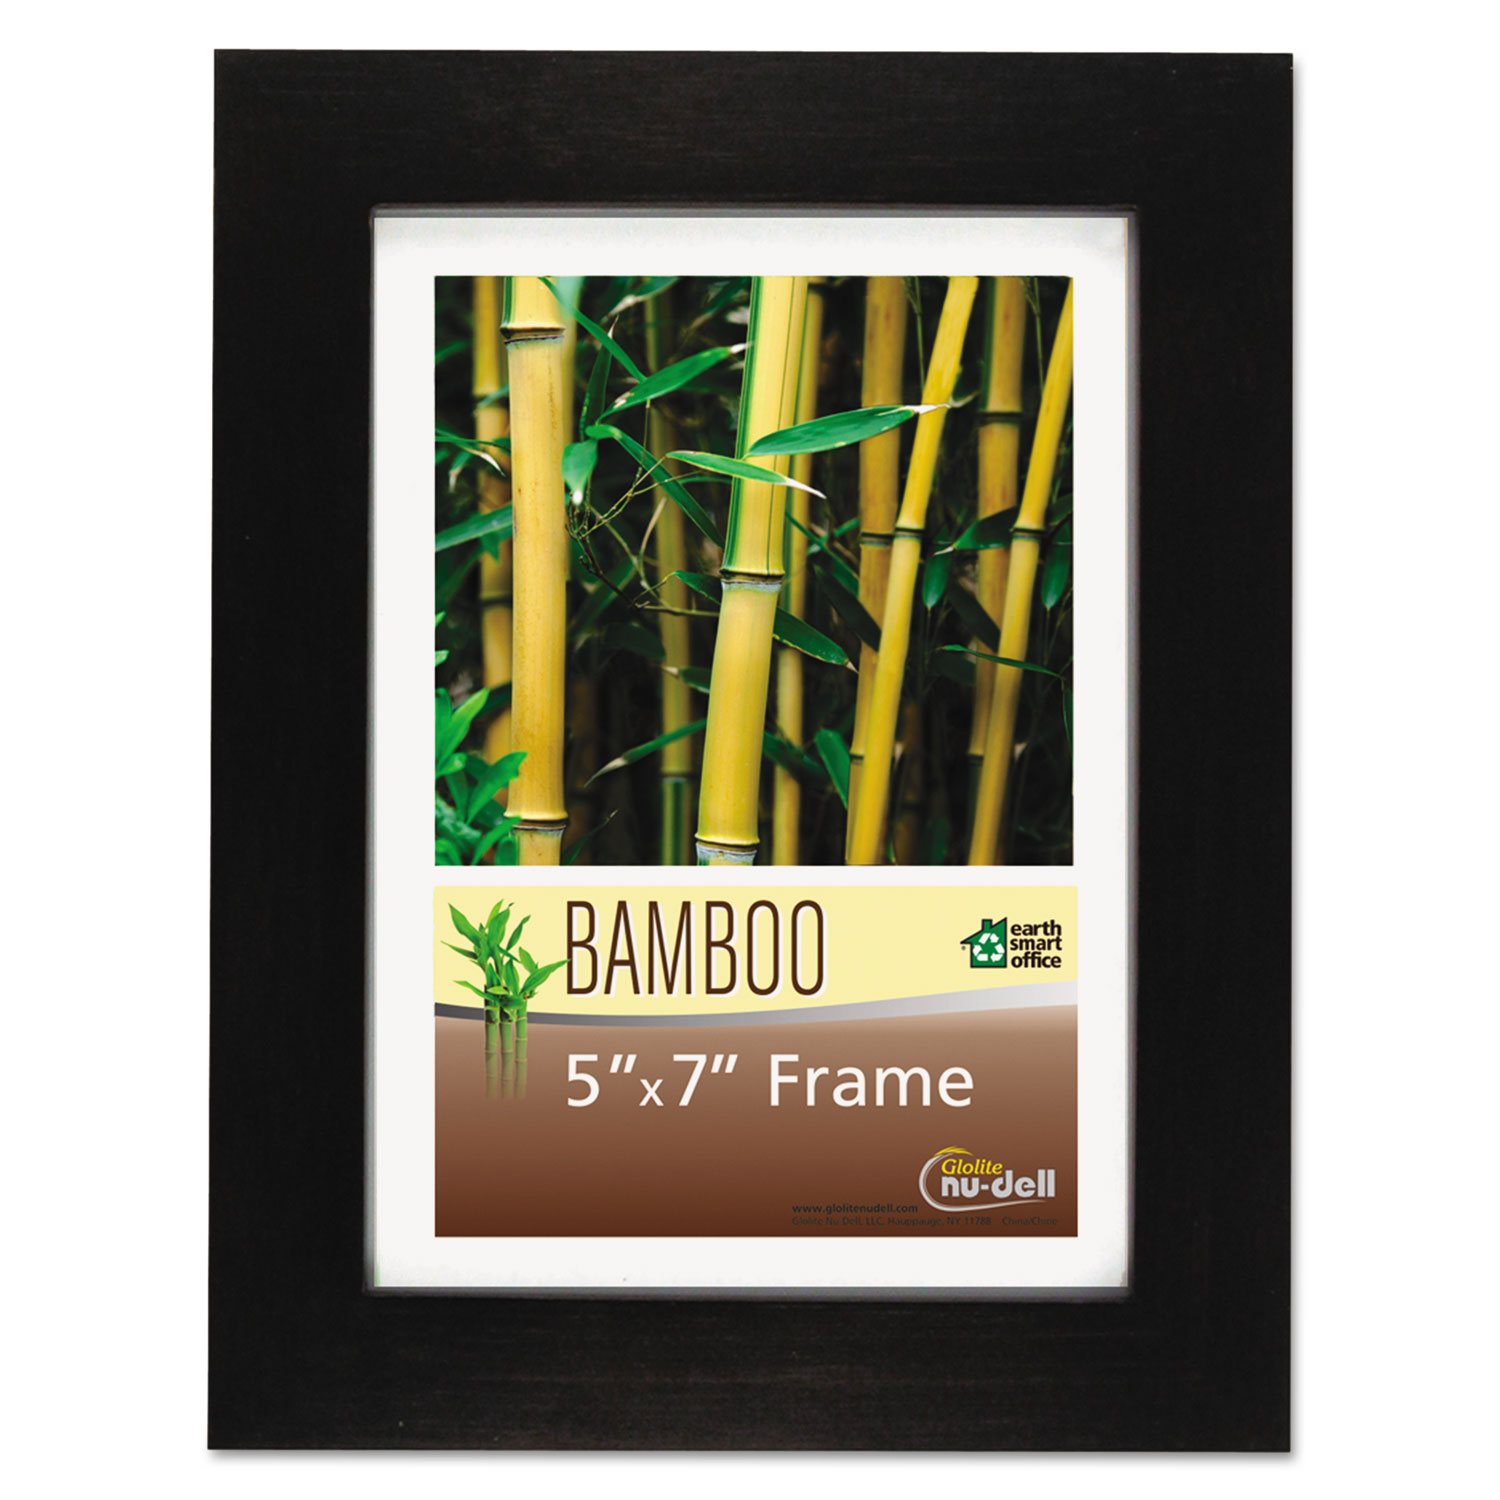  NuDell 14157 Bamboo Frame, 5 x 7, Black (NUD14157) 